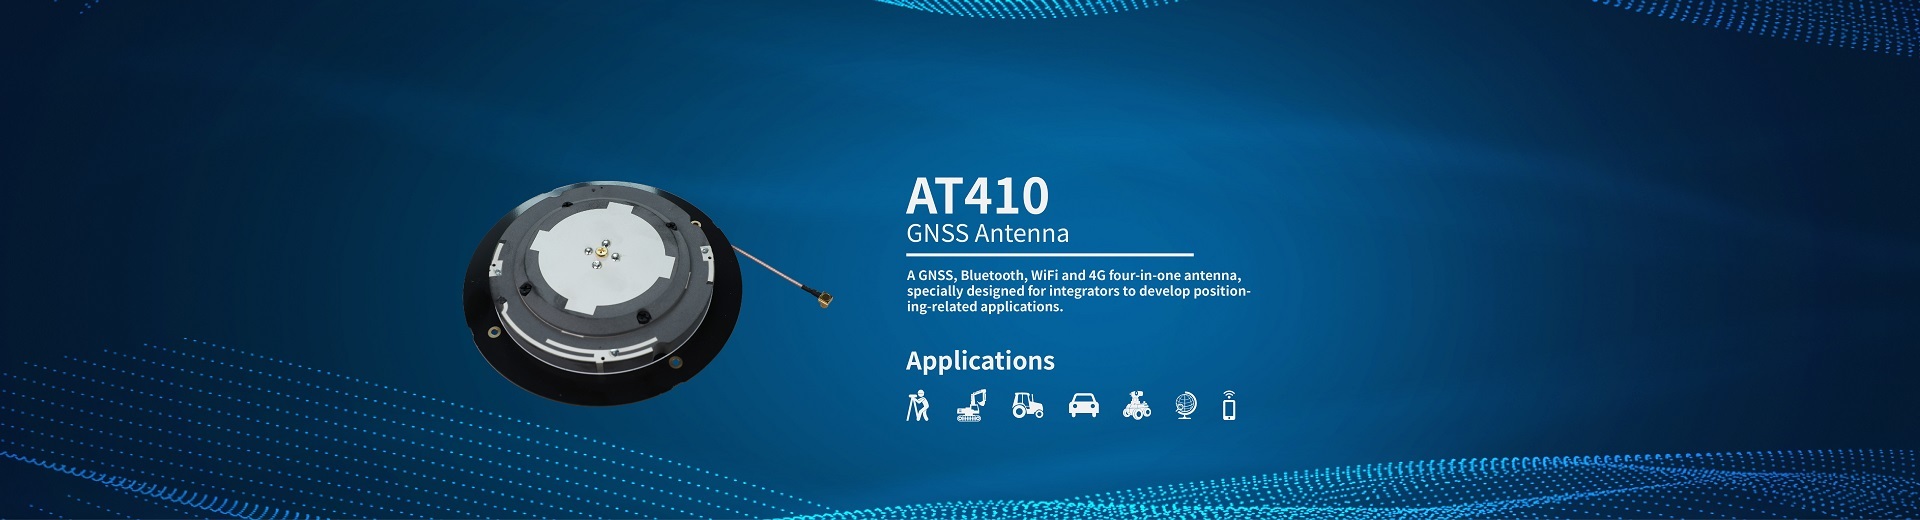 AT410 GNSS Antenna